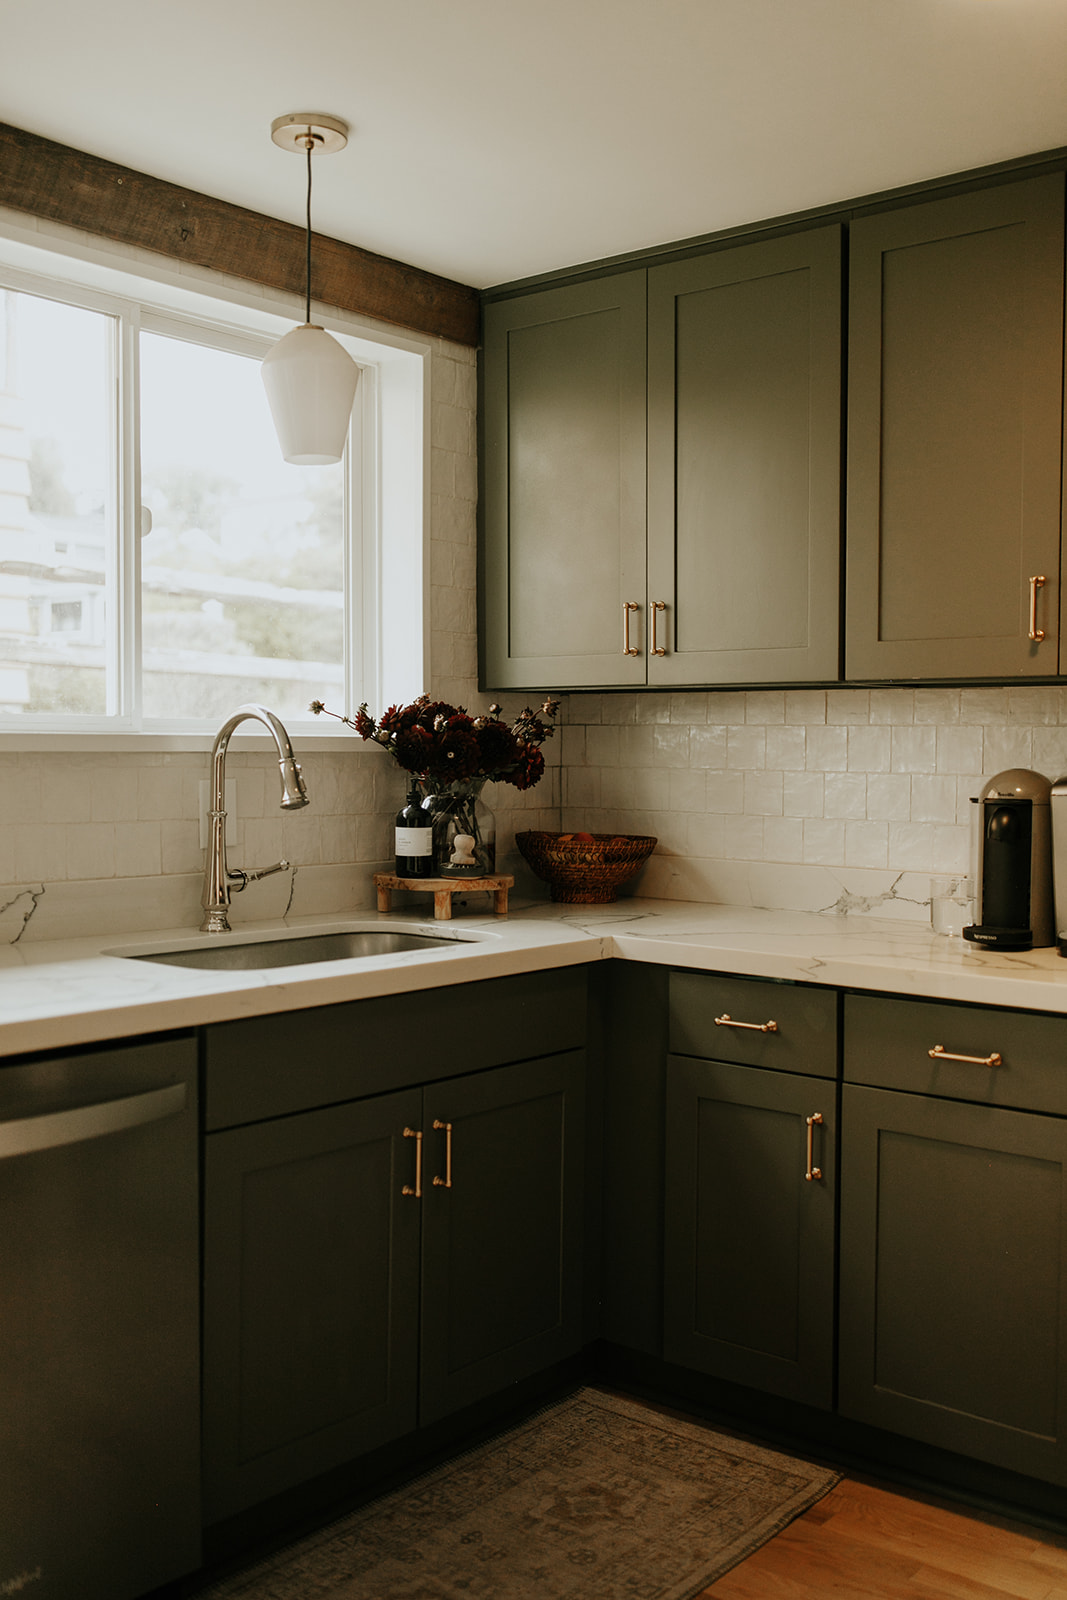 A photo of a kitchen with a wood beam on the wall, green kitchen cabinets with brass handles, a quartz countertop with stainless steel faucet and coffee maker on the counter.